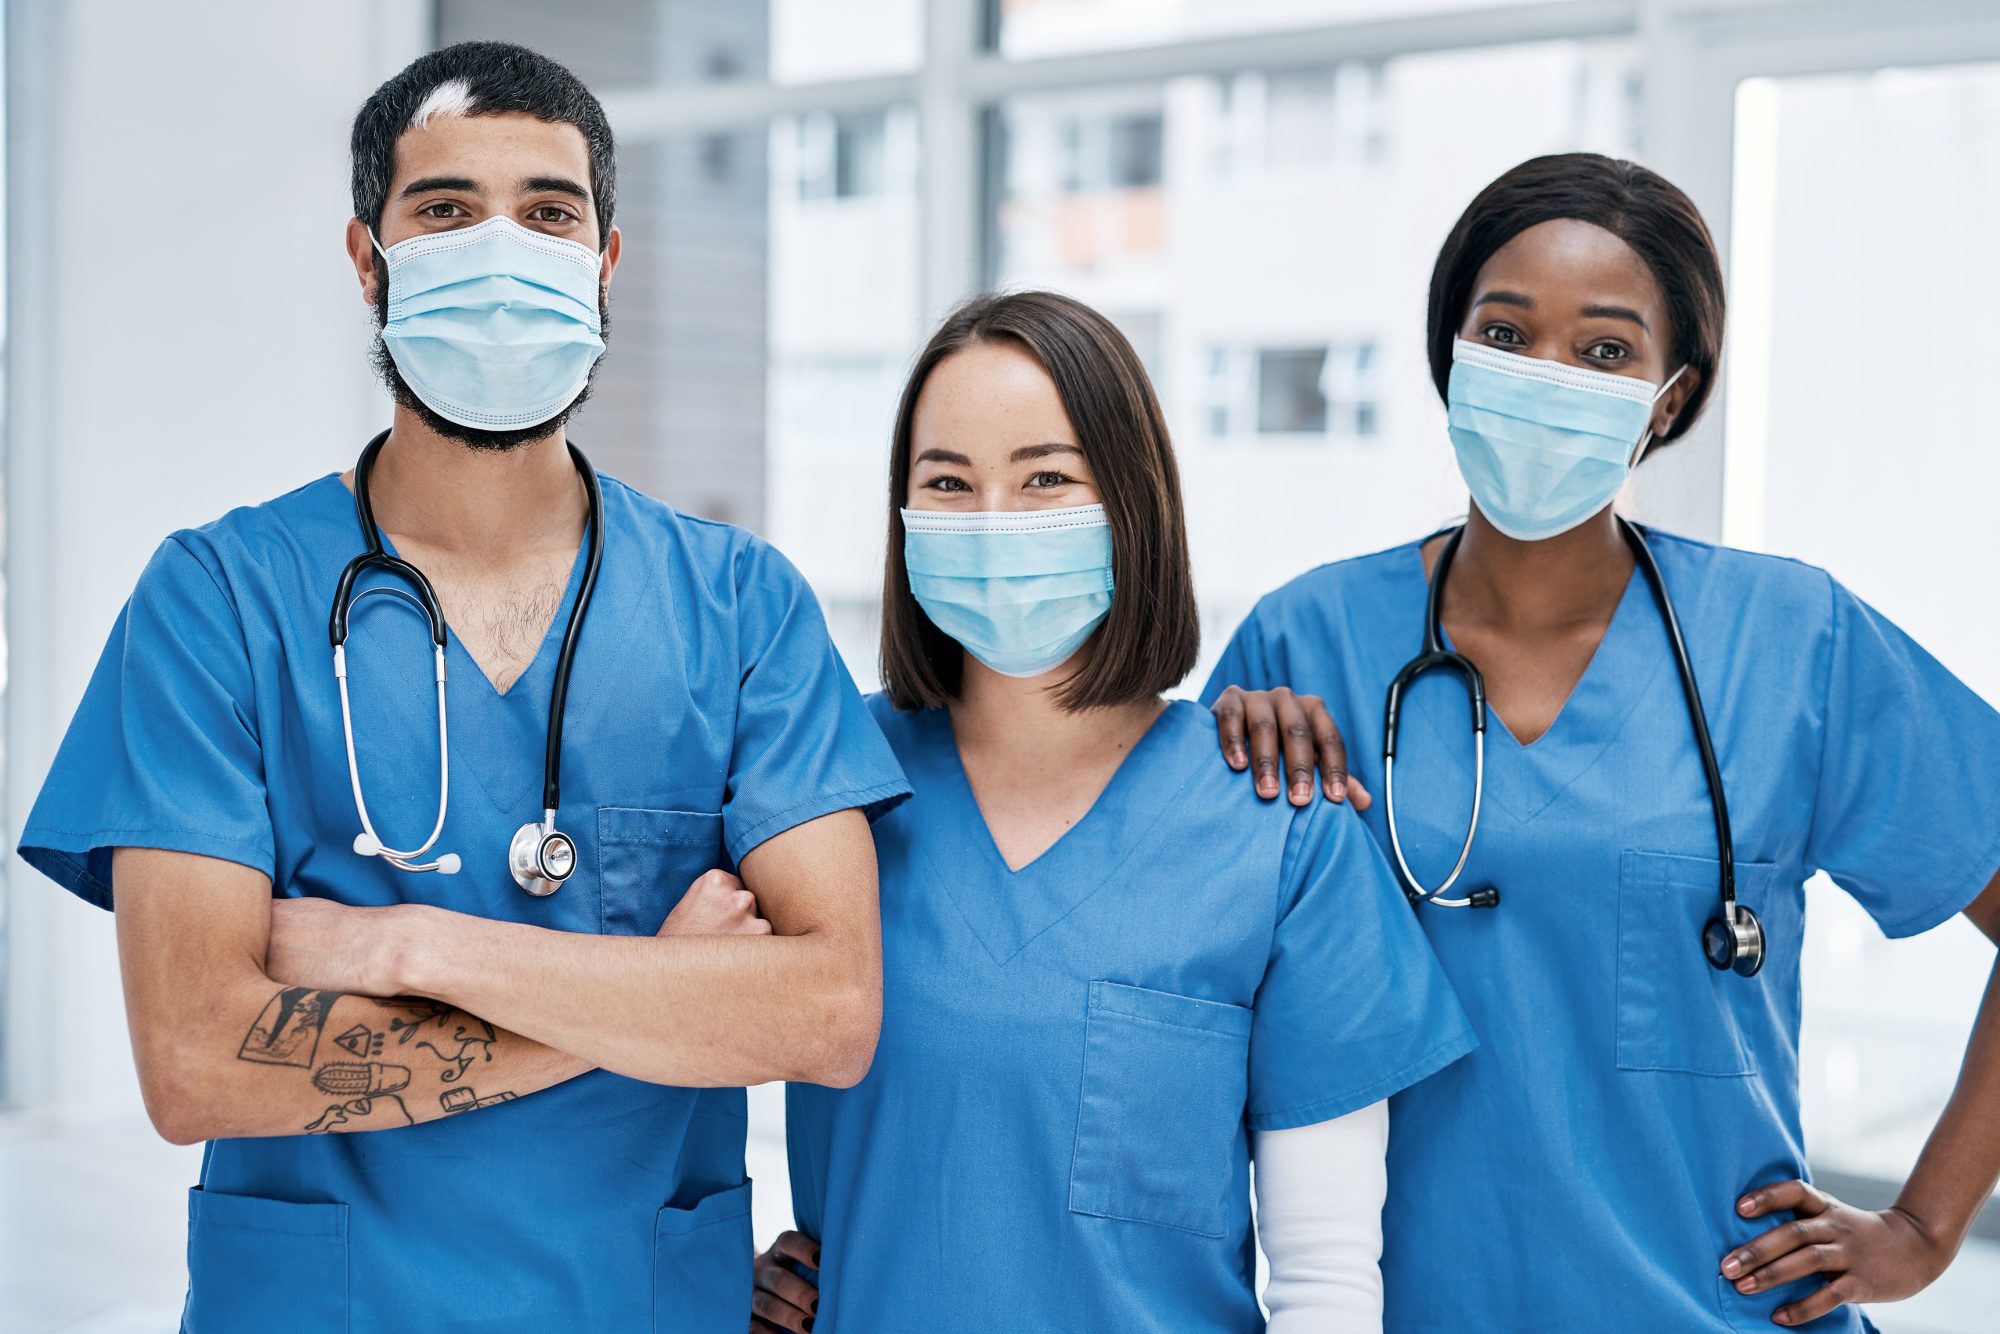 Three health care staff standing side by side wearing scrubs and masks